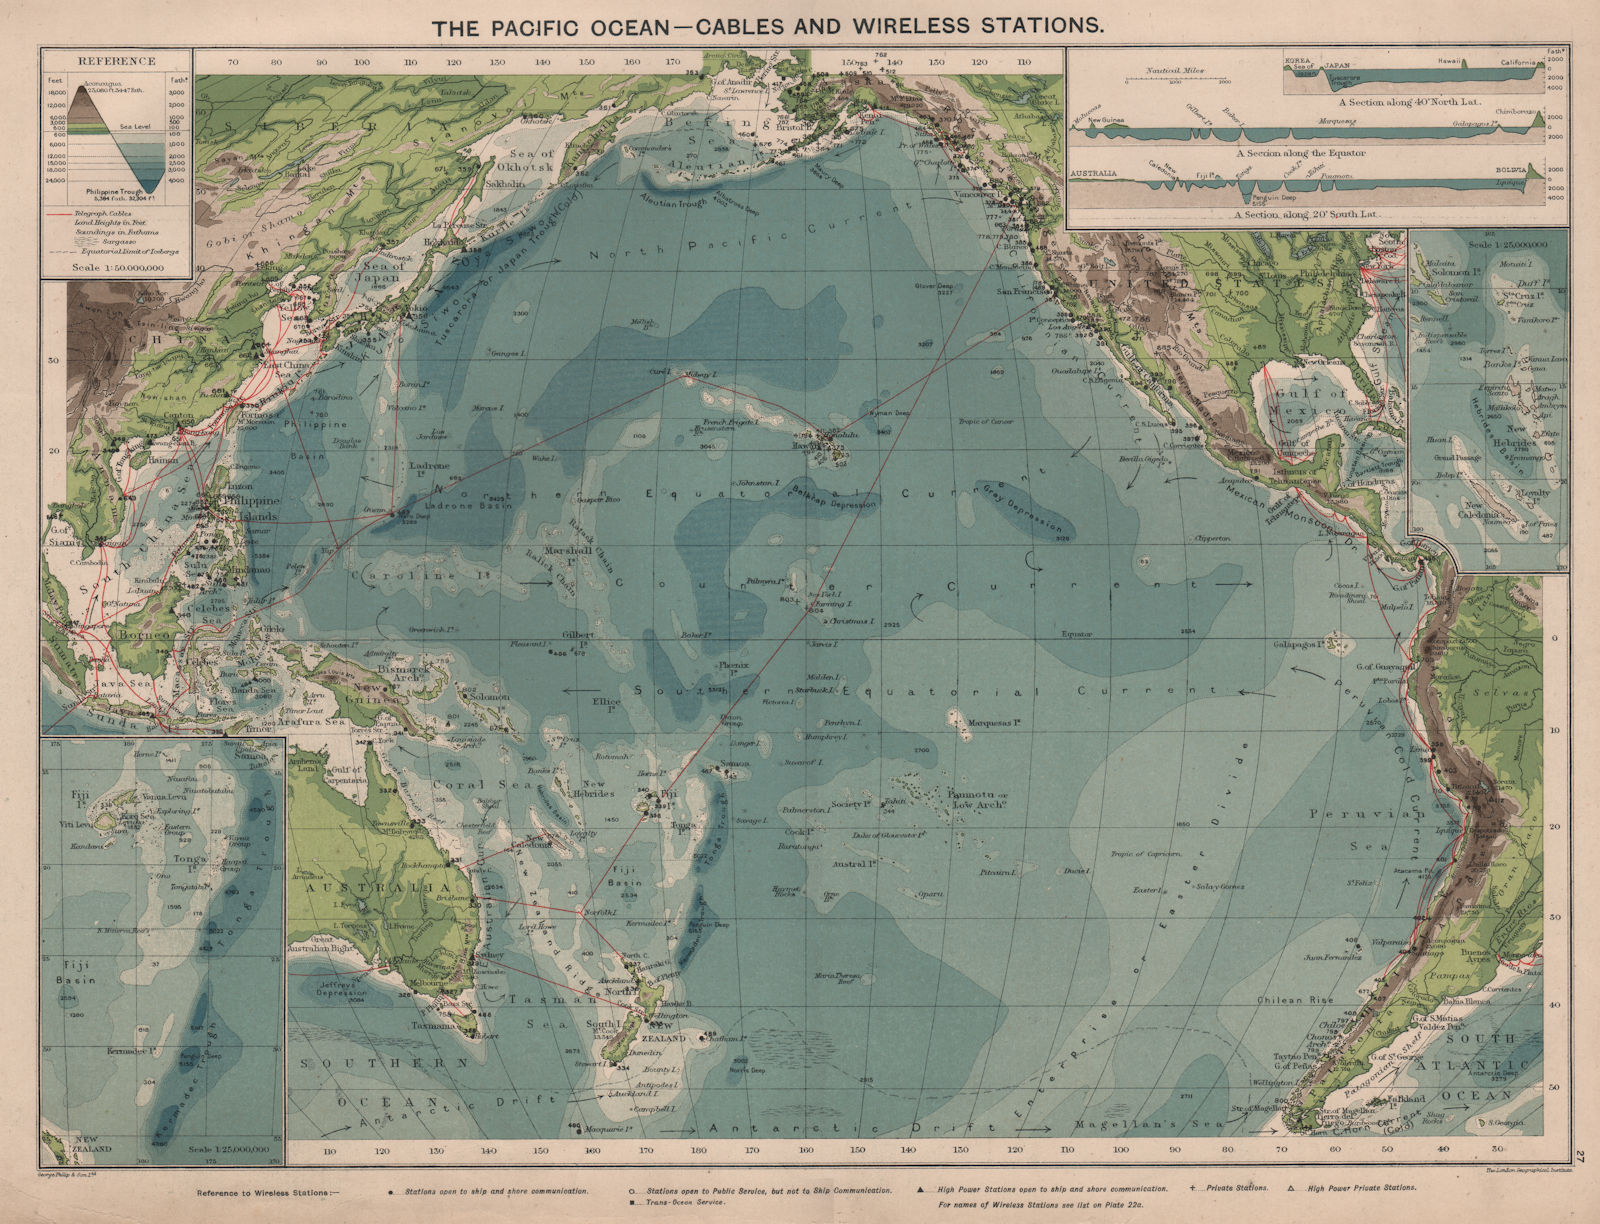 Associate Product Pacific Ocean. Cables & Wireless Stations. Sections 1918 old antique map chart